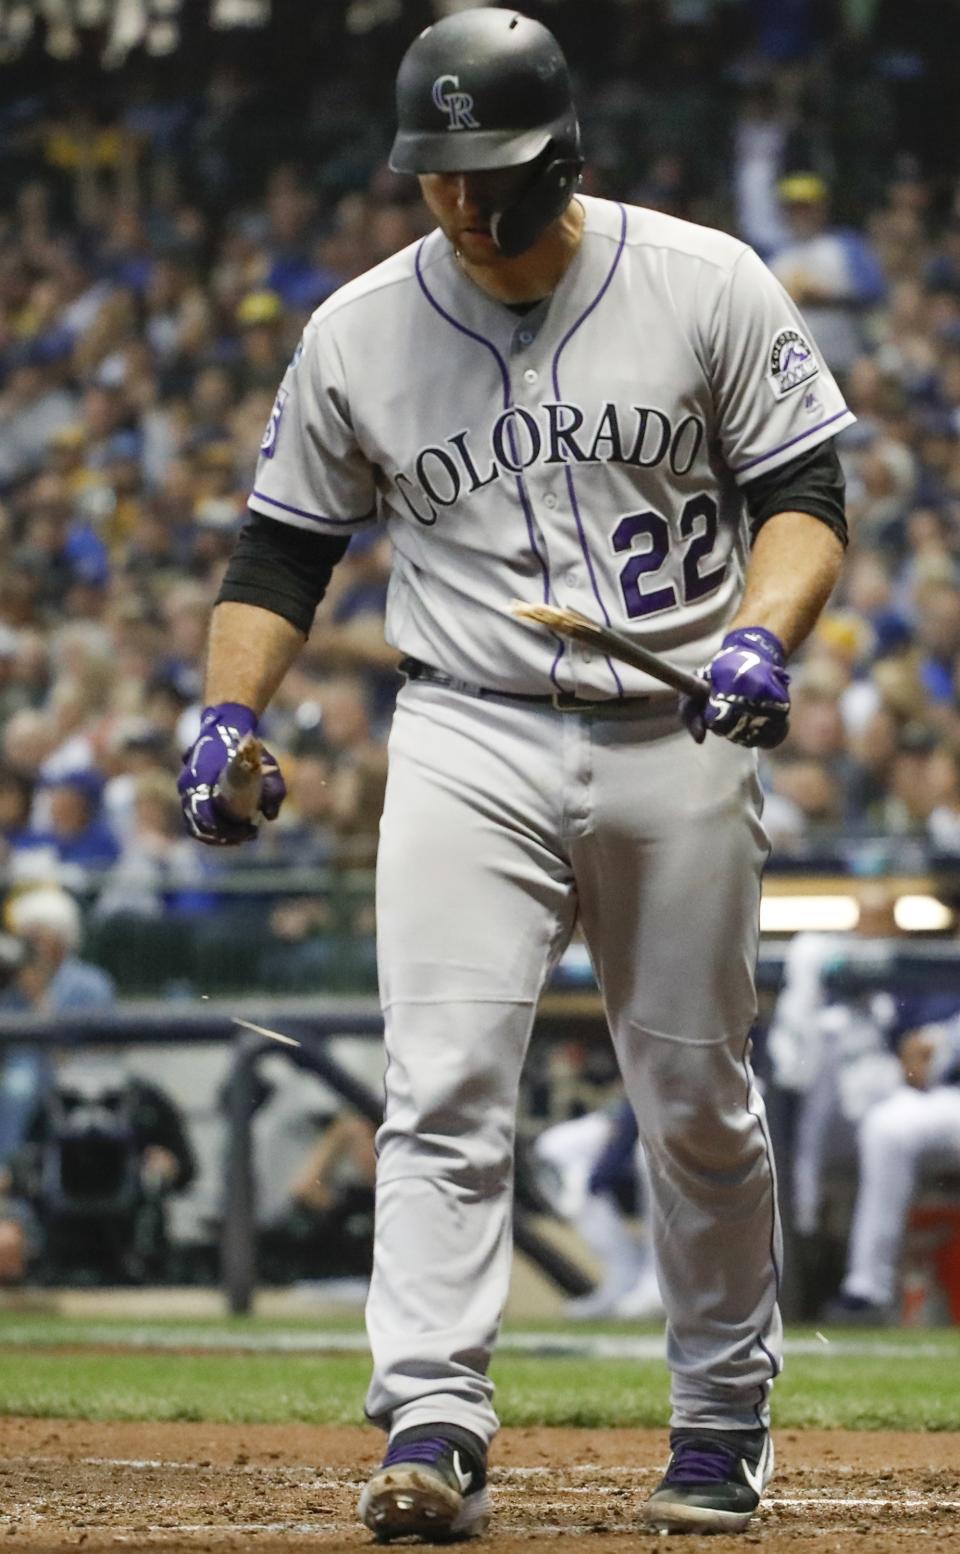 Colorado Rockies' Chris Iannetta (22) breaks his bat after striking out during the seventh inning of Game 2 of the National League Divisional Series baseball game against the Milwaukee Brewers Friday, Oct. 5, 2018, in Milwaukee. (AP Photo/Jeff Roberson)